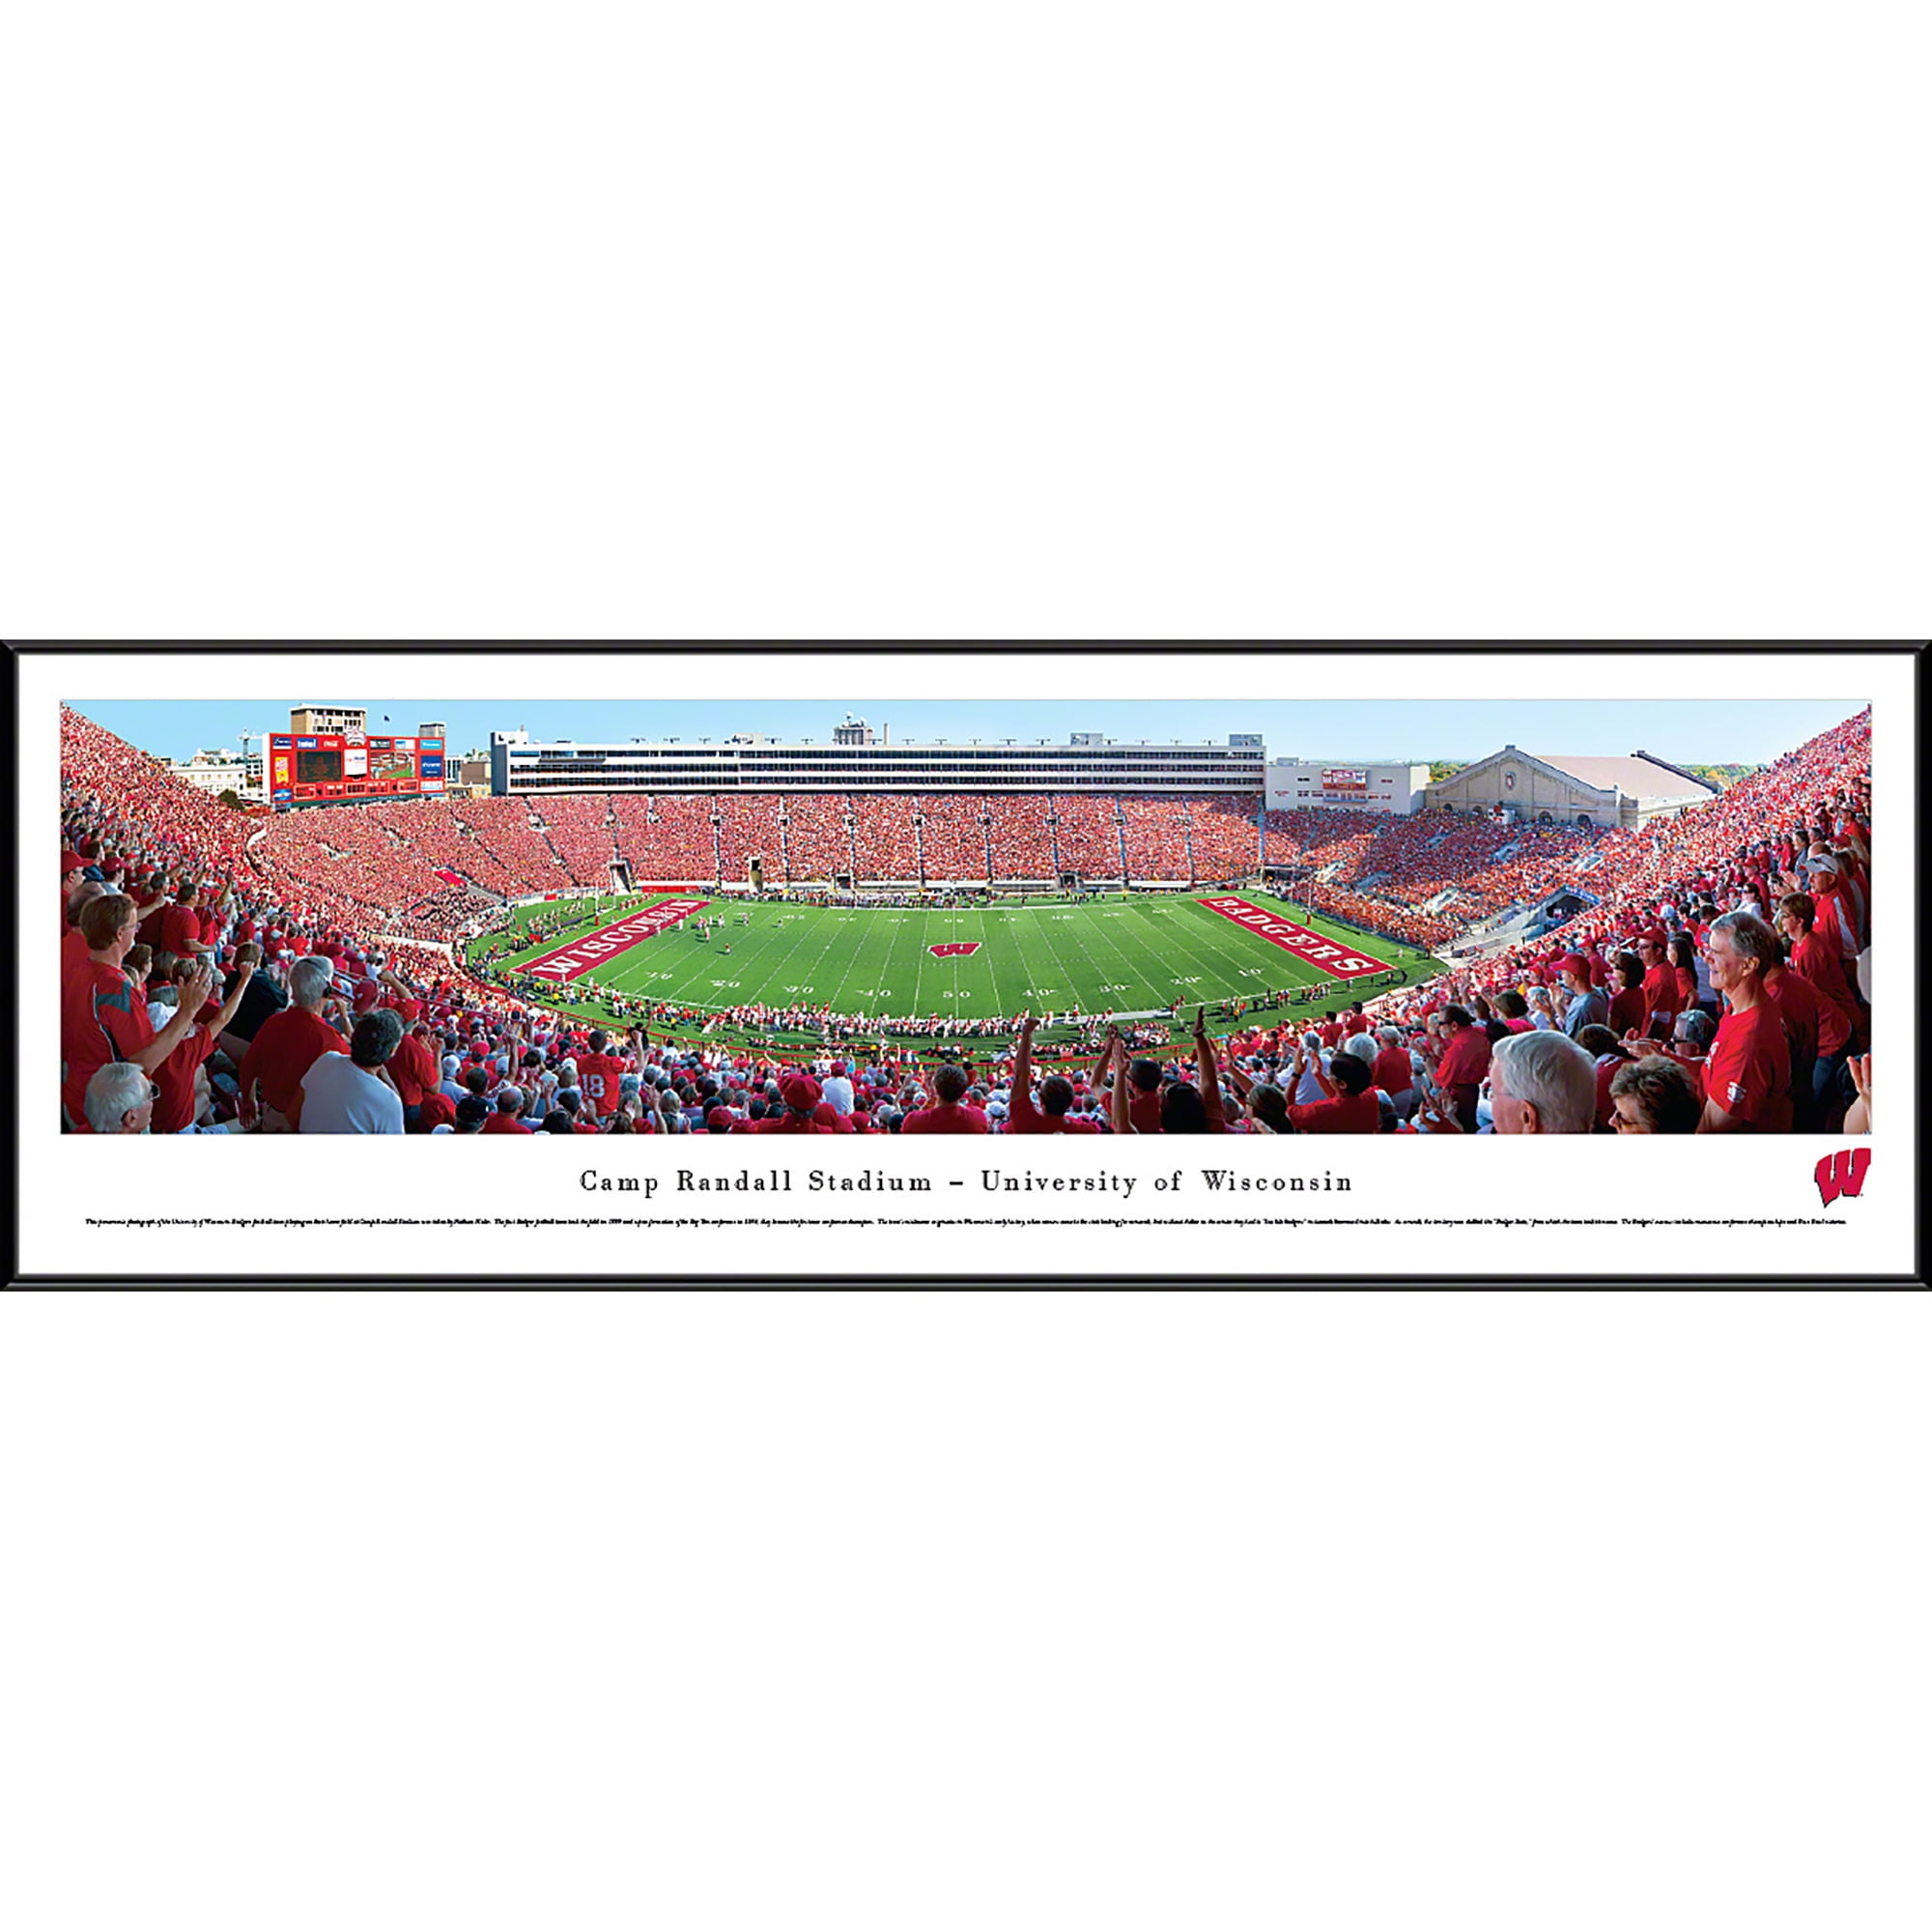 Wisconsin Badgers Football Panoramic Posters and Framed Pictures by Blakeway Panoramas